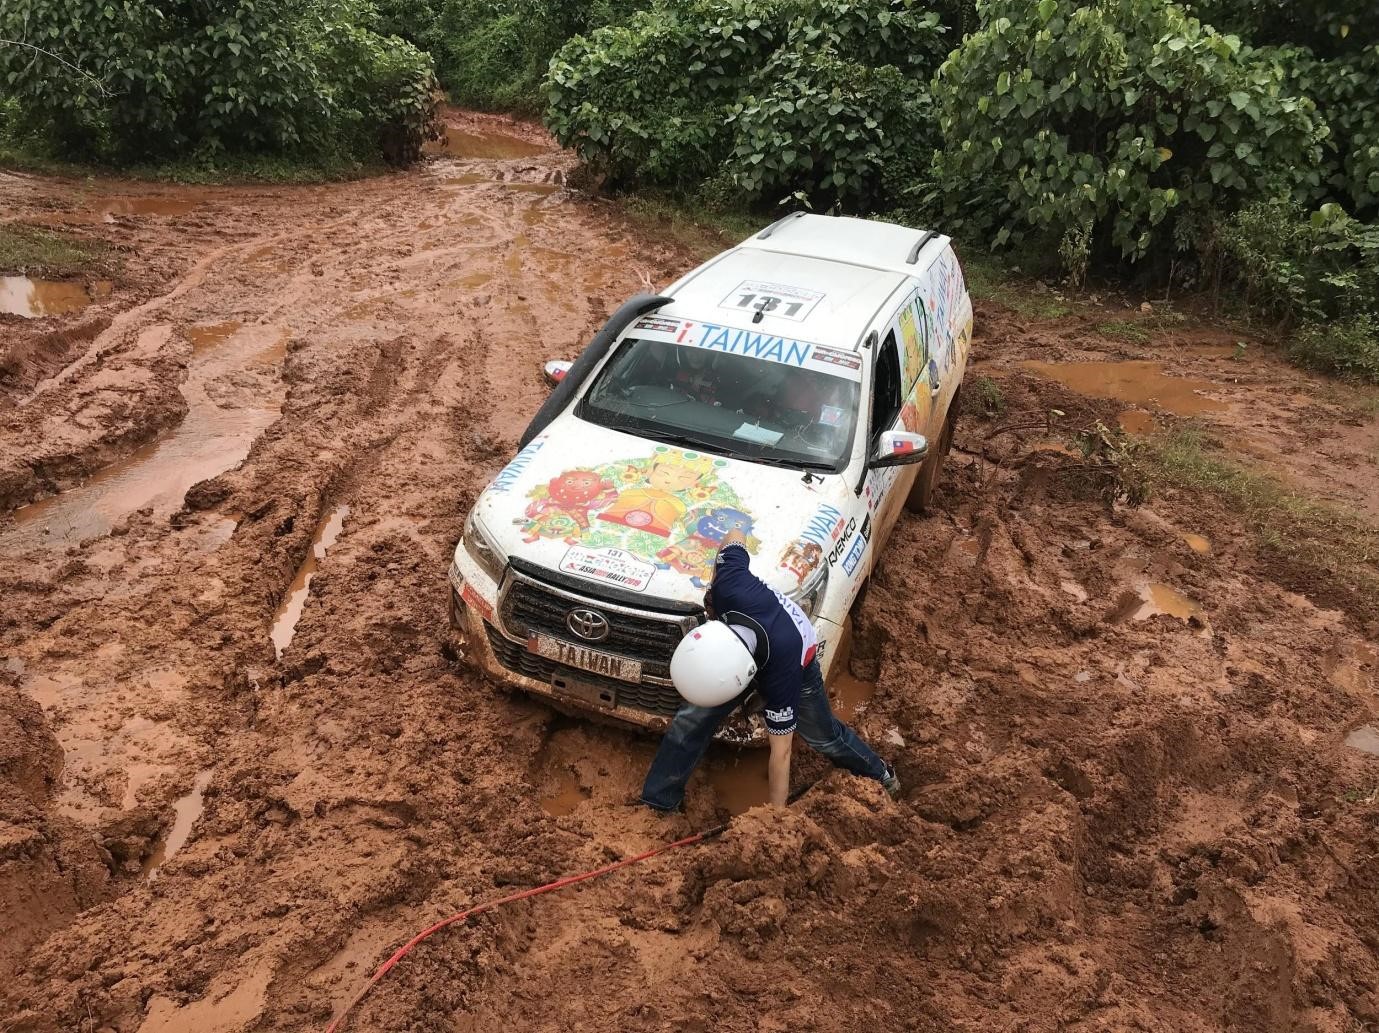 A series of rainstorms makes the rugged road even more dangerous than before.